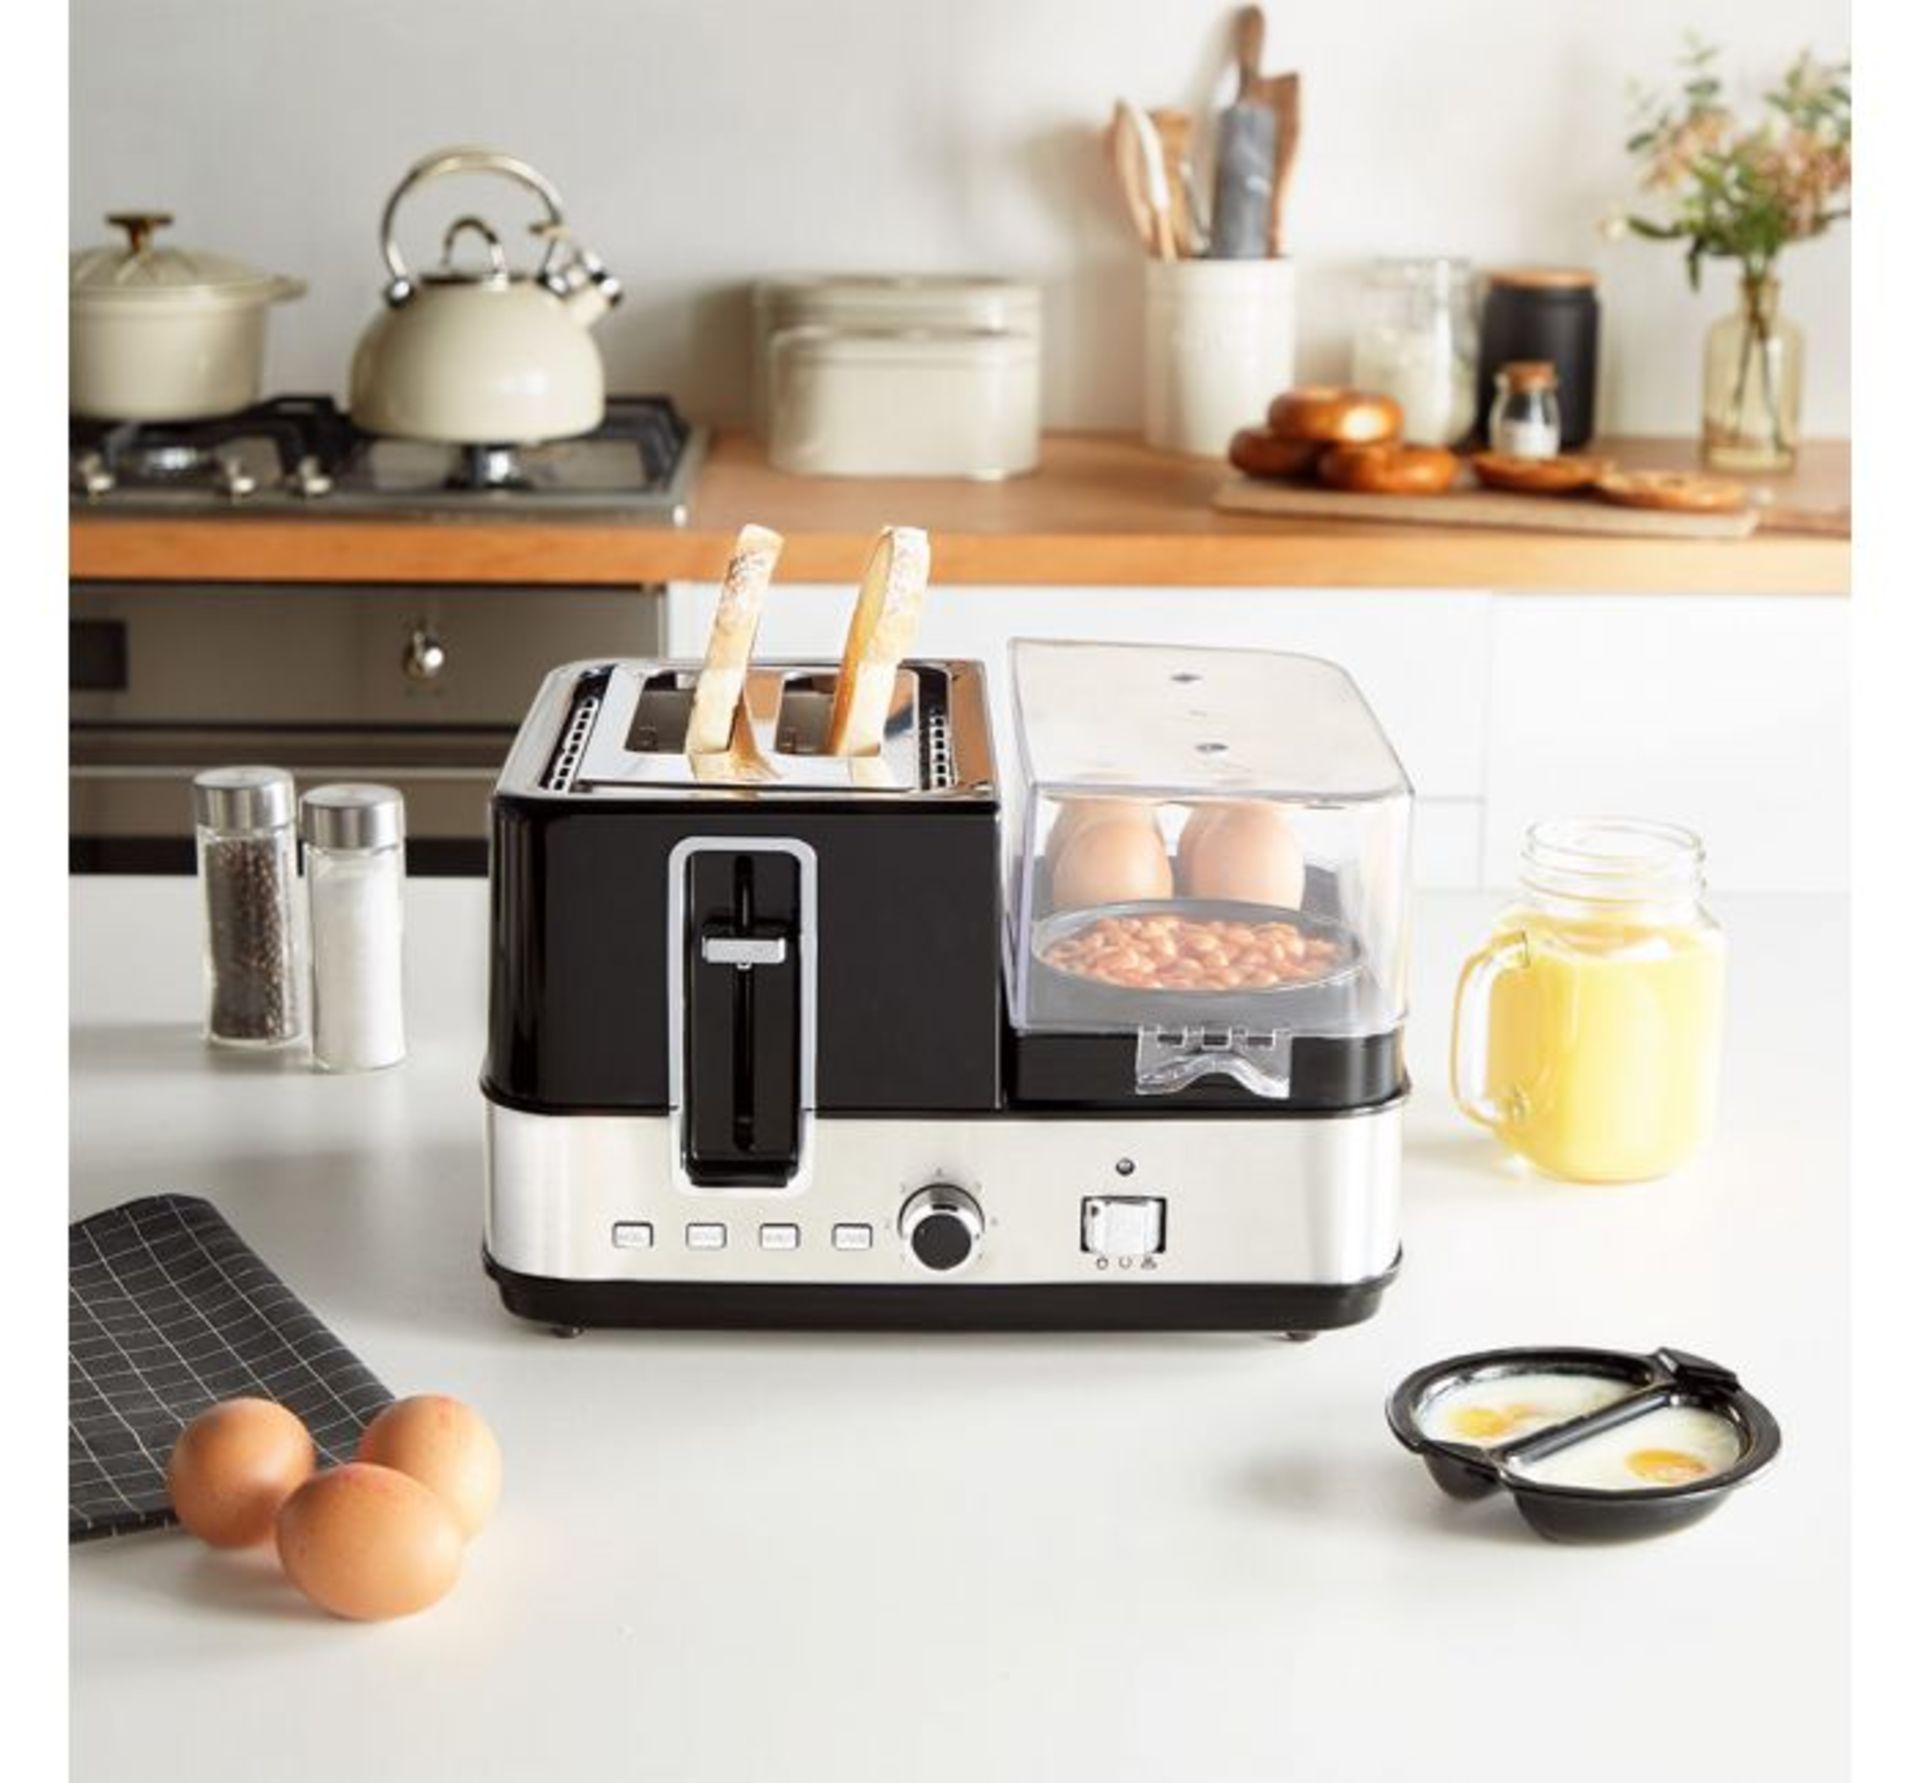 (D14) 2 in 1 Egg Boiler & Toaster The 2-in-1 Egg Boiler & Toaster can poach eggs in the poachi... - Image 2 of 4